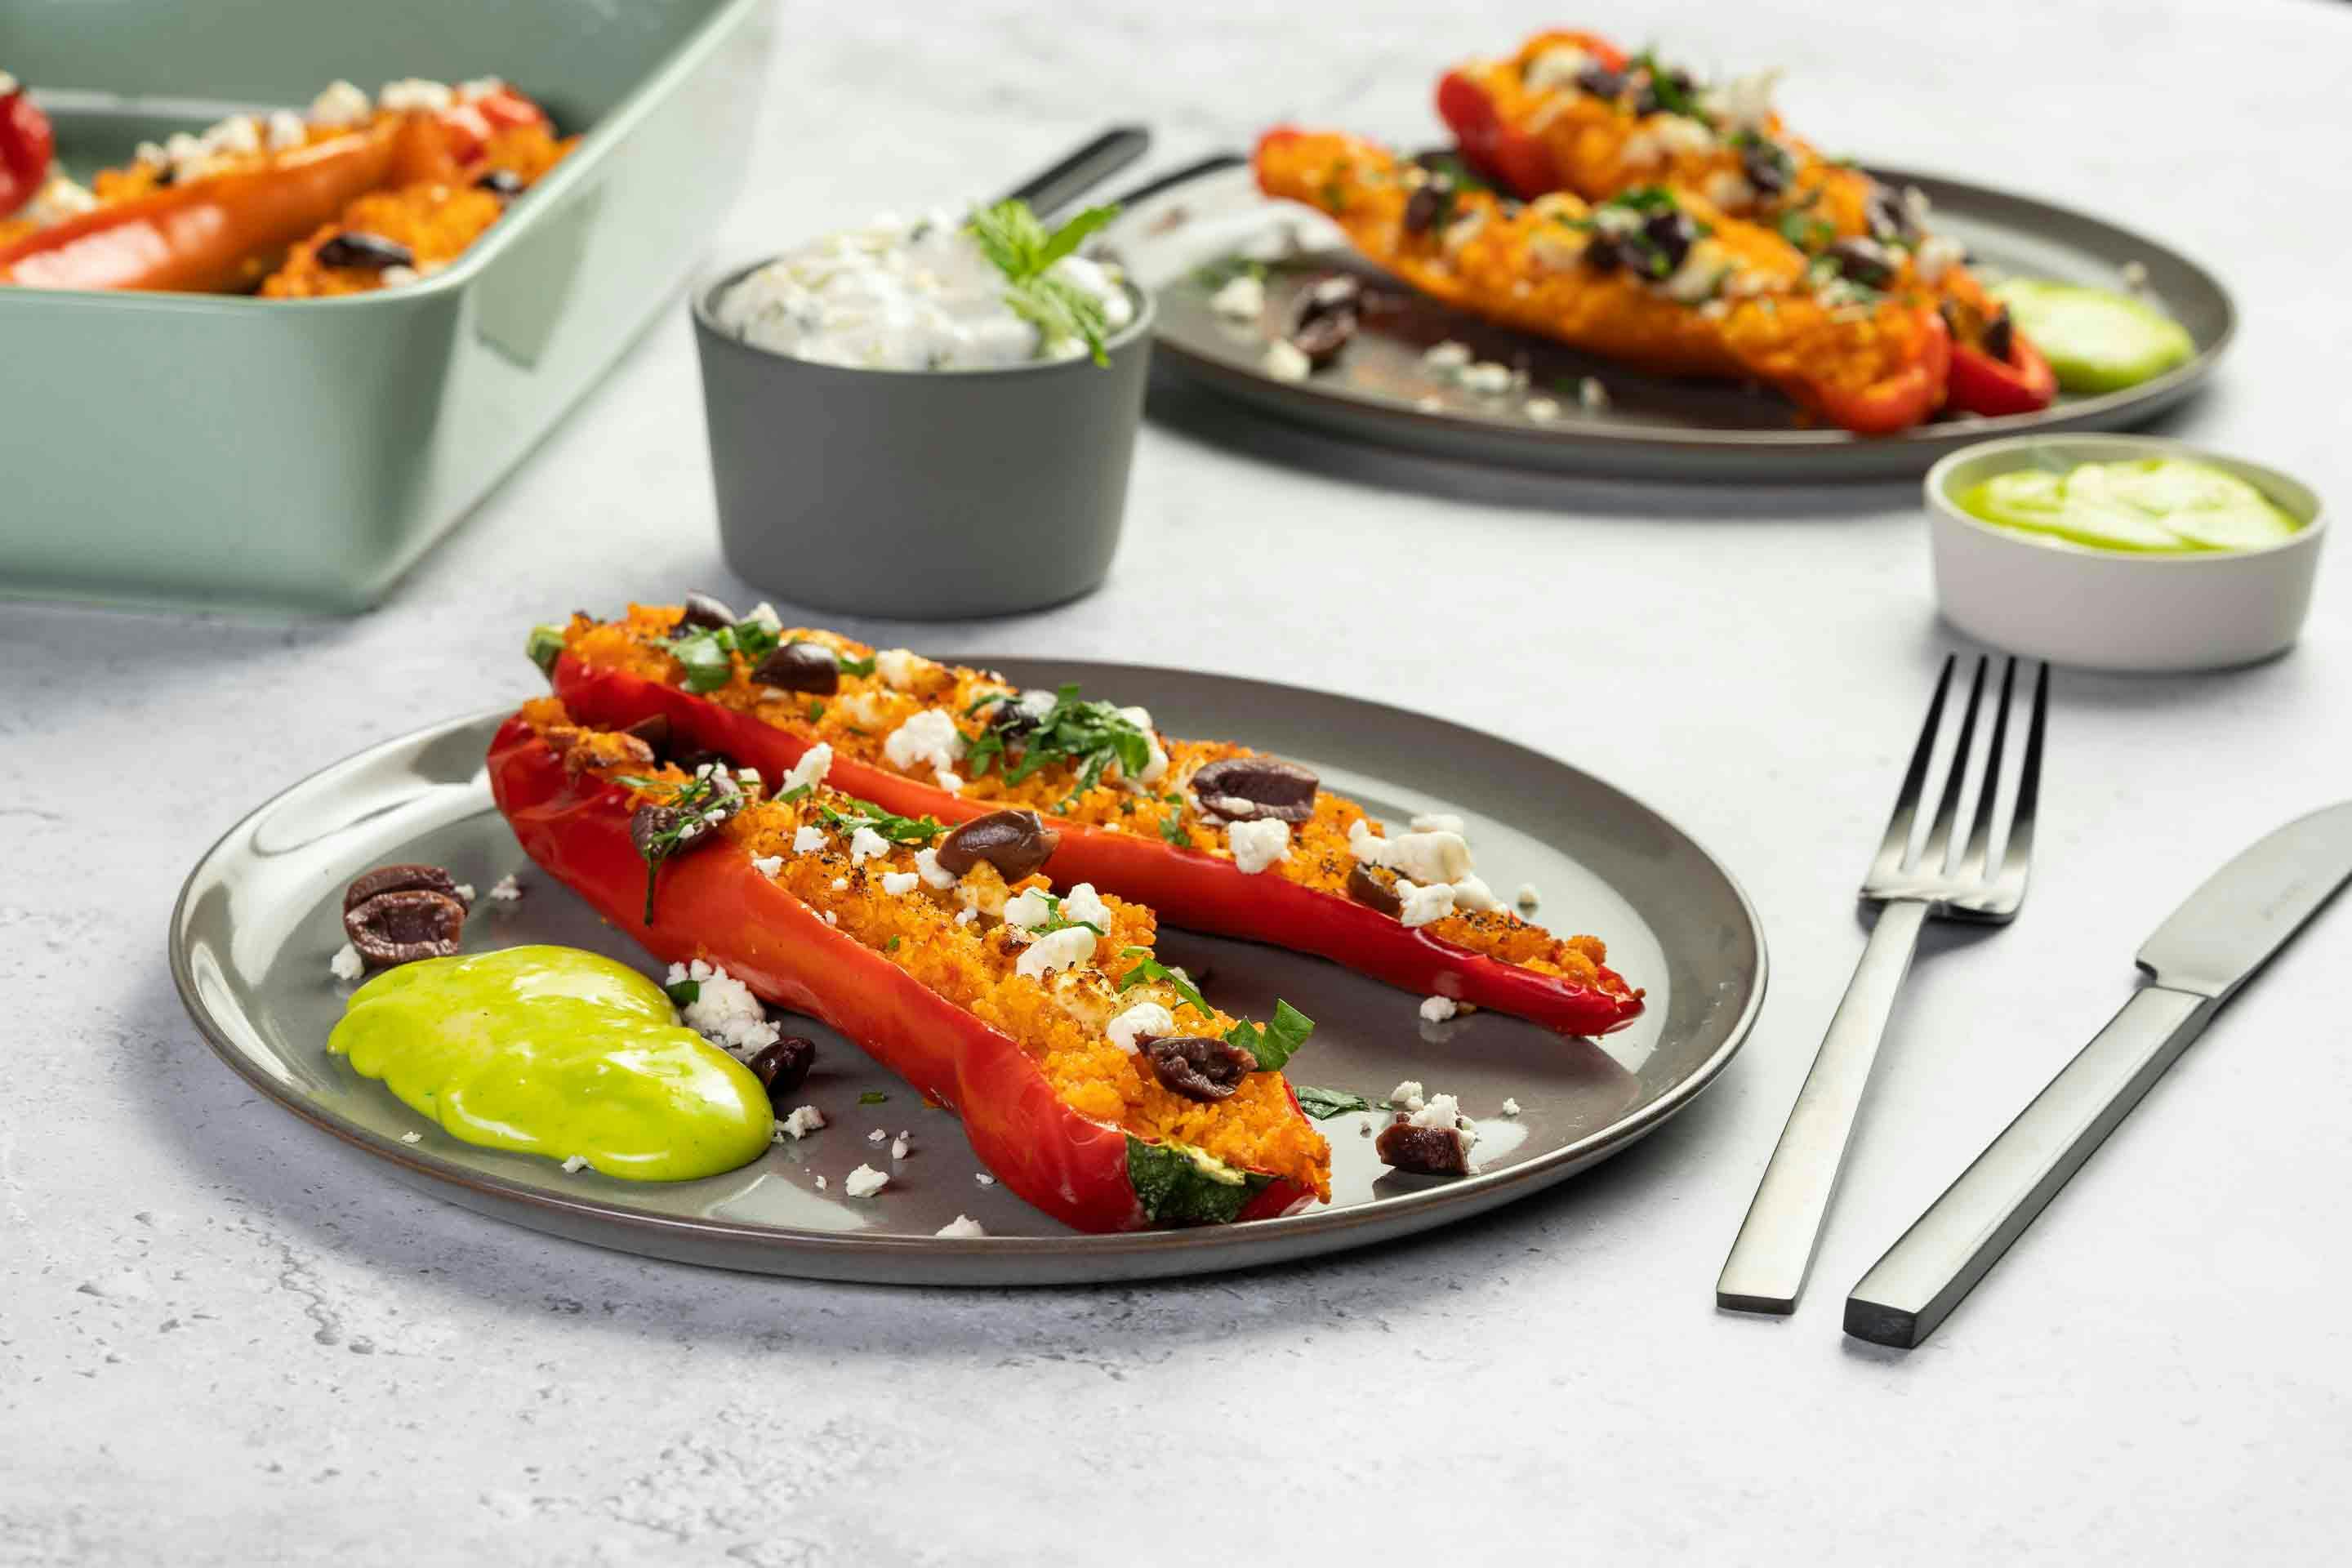 Stuffed Peppers with a Pea and Mint Dip